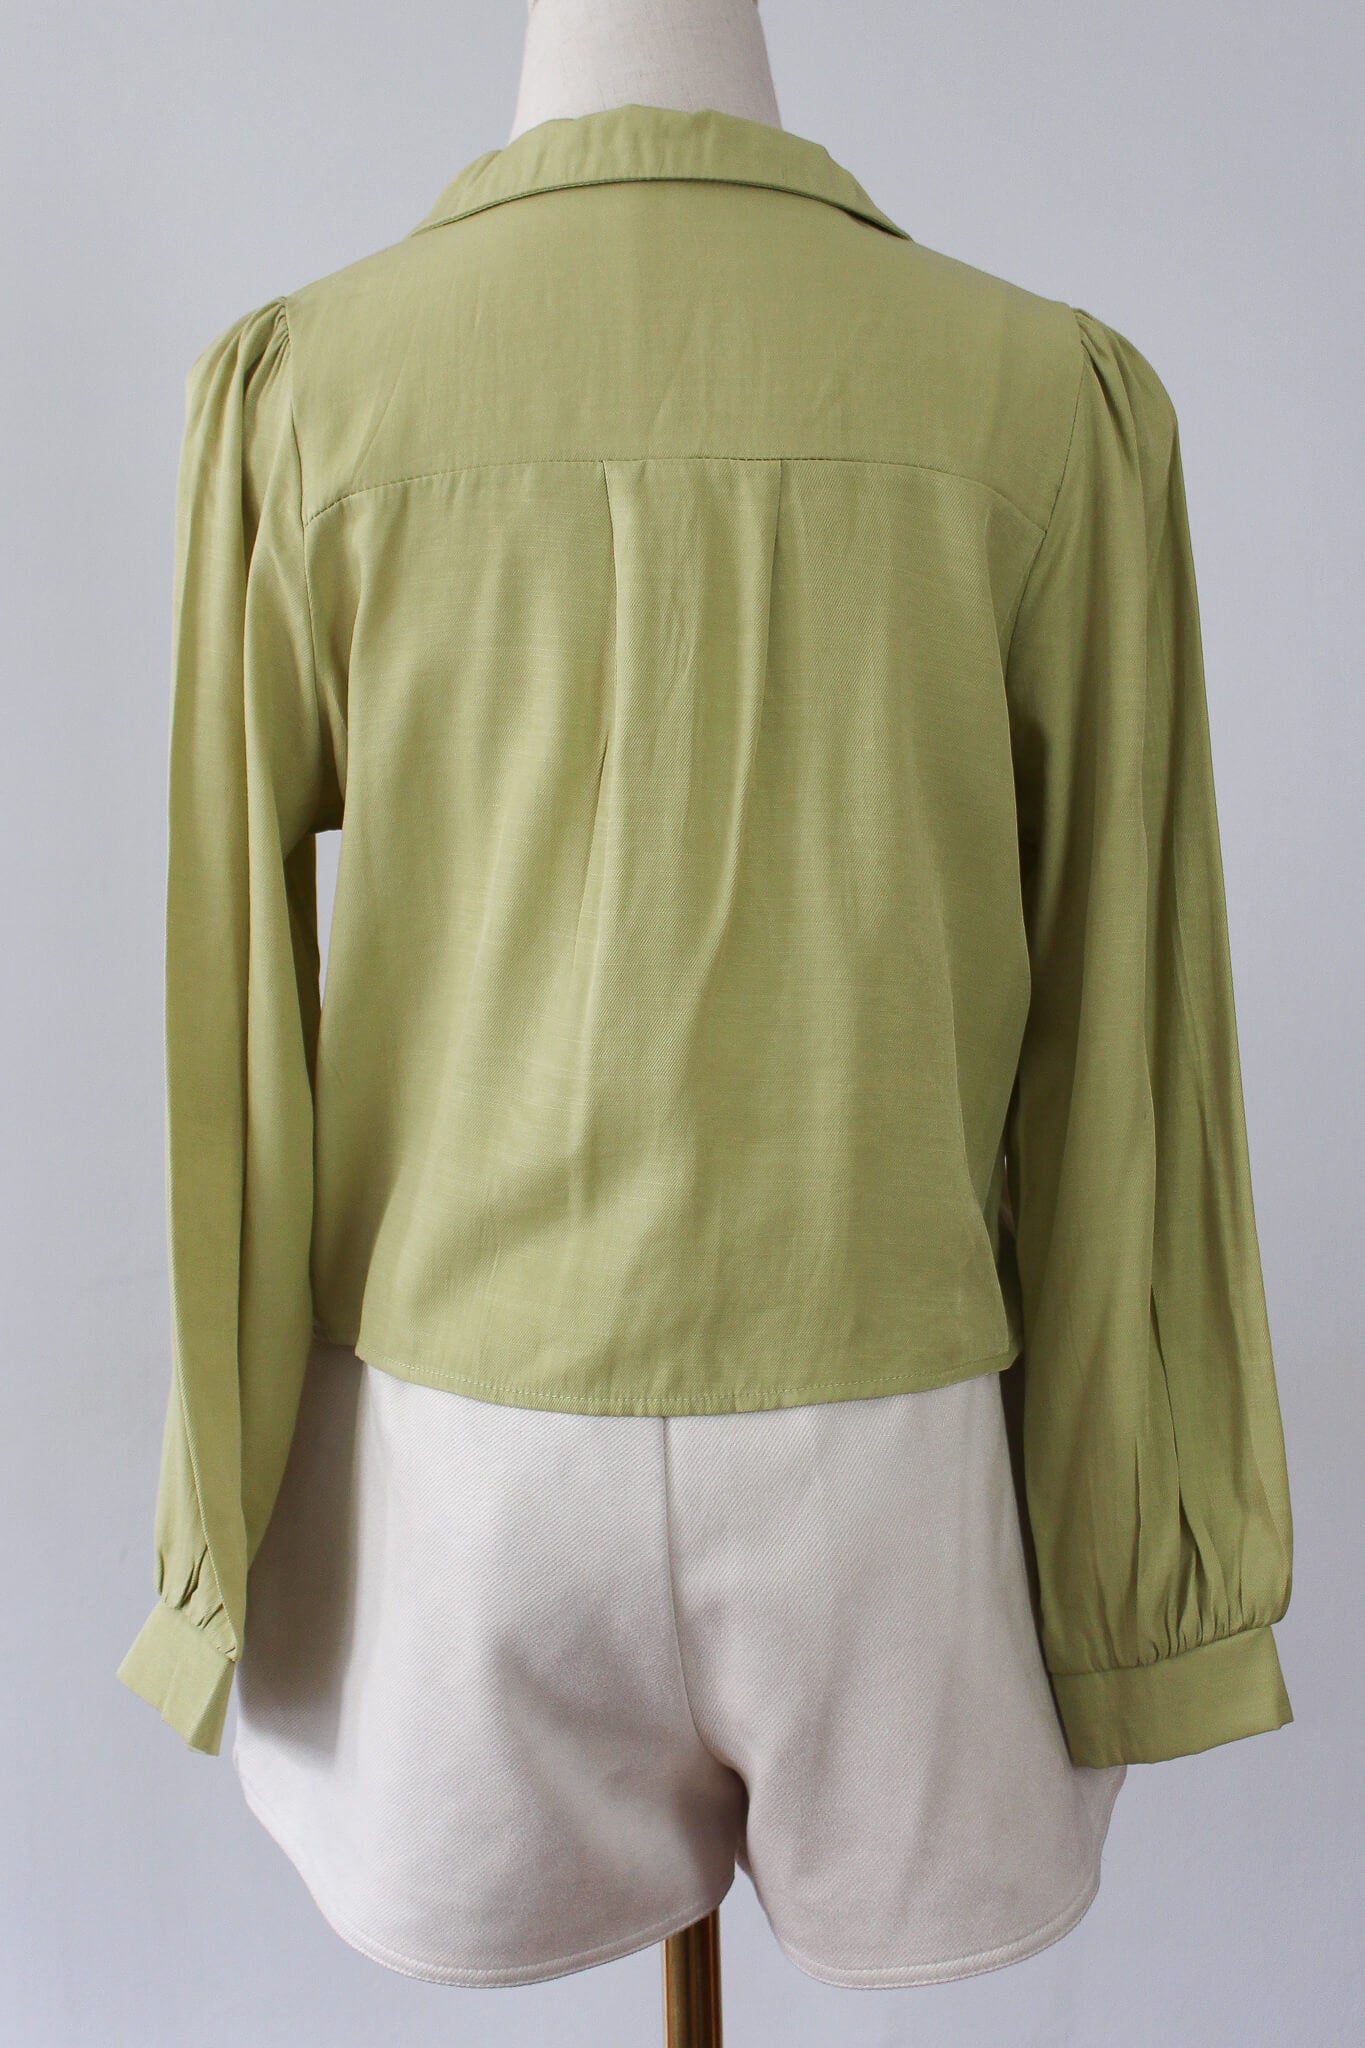 Cropped shirt that can be worn as outerwear. THin and lightweight